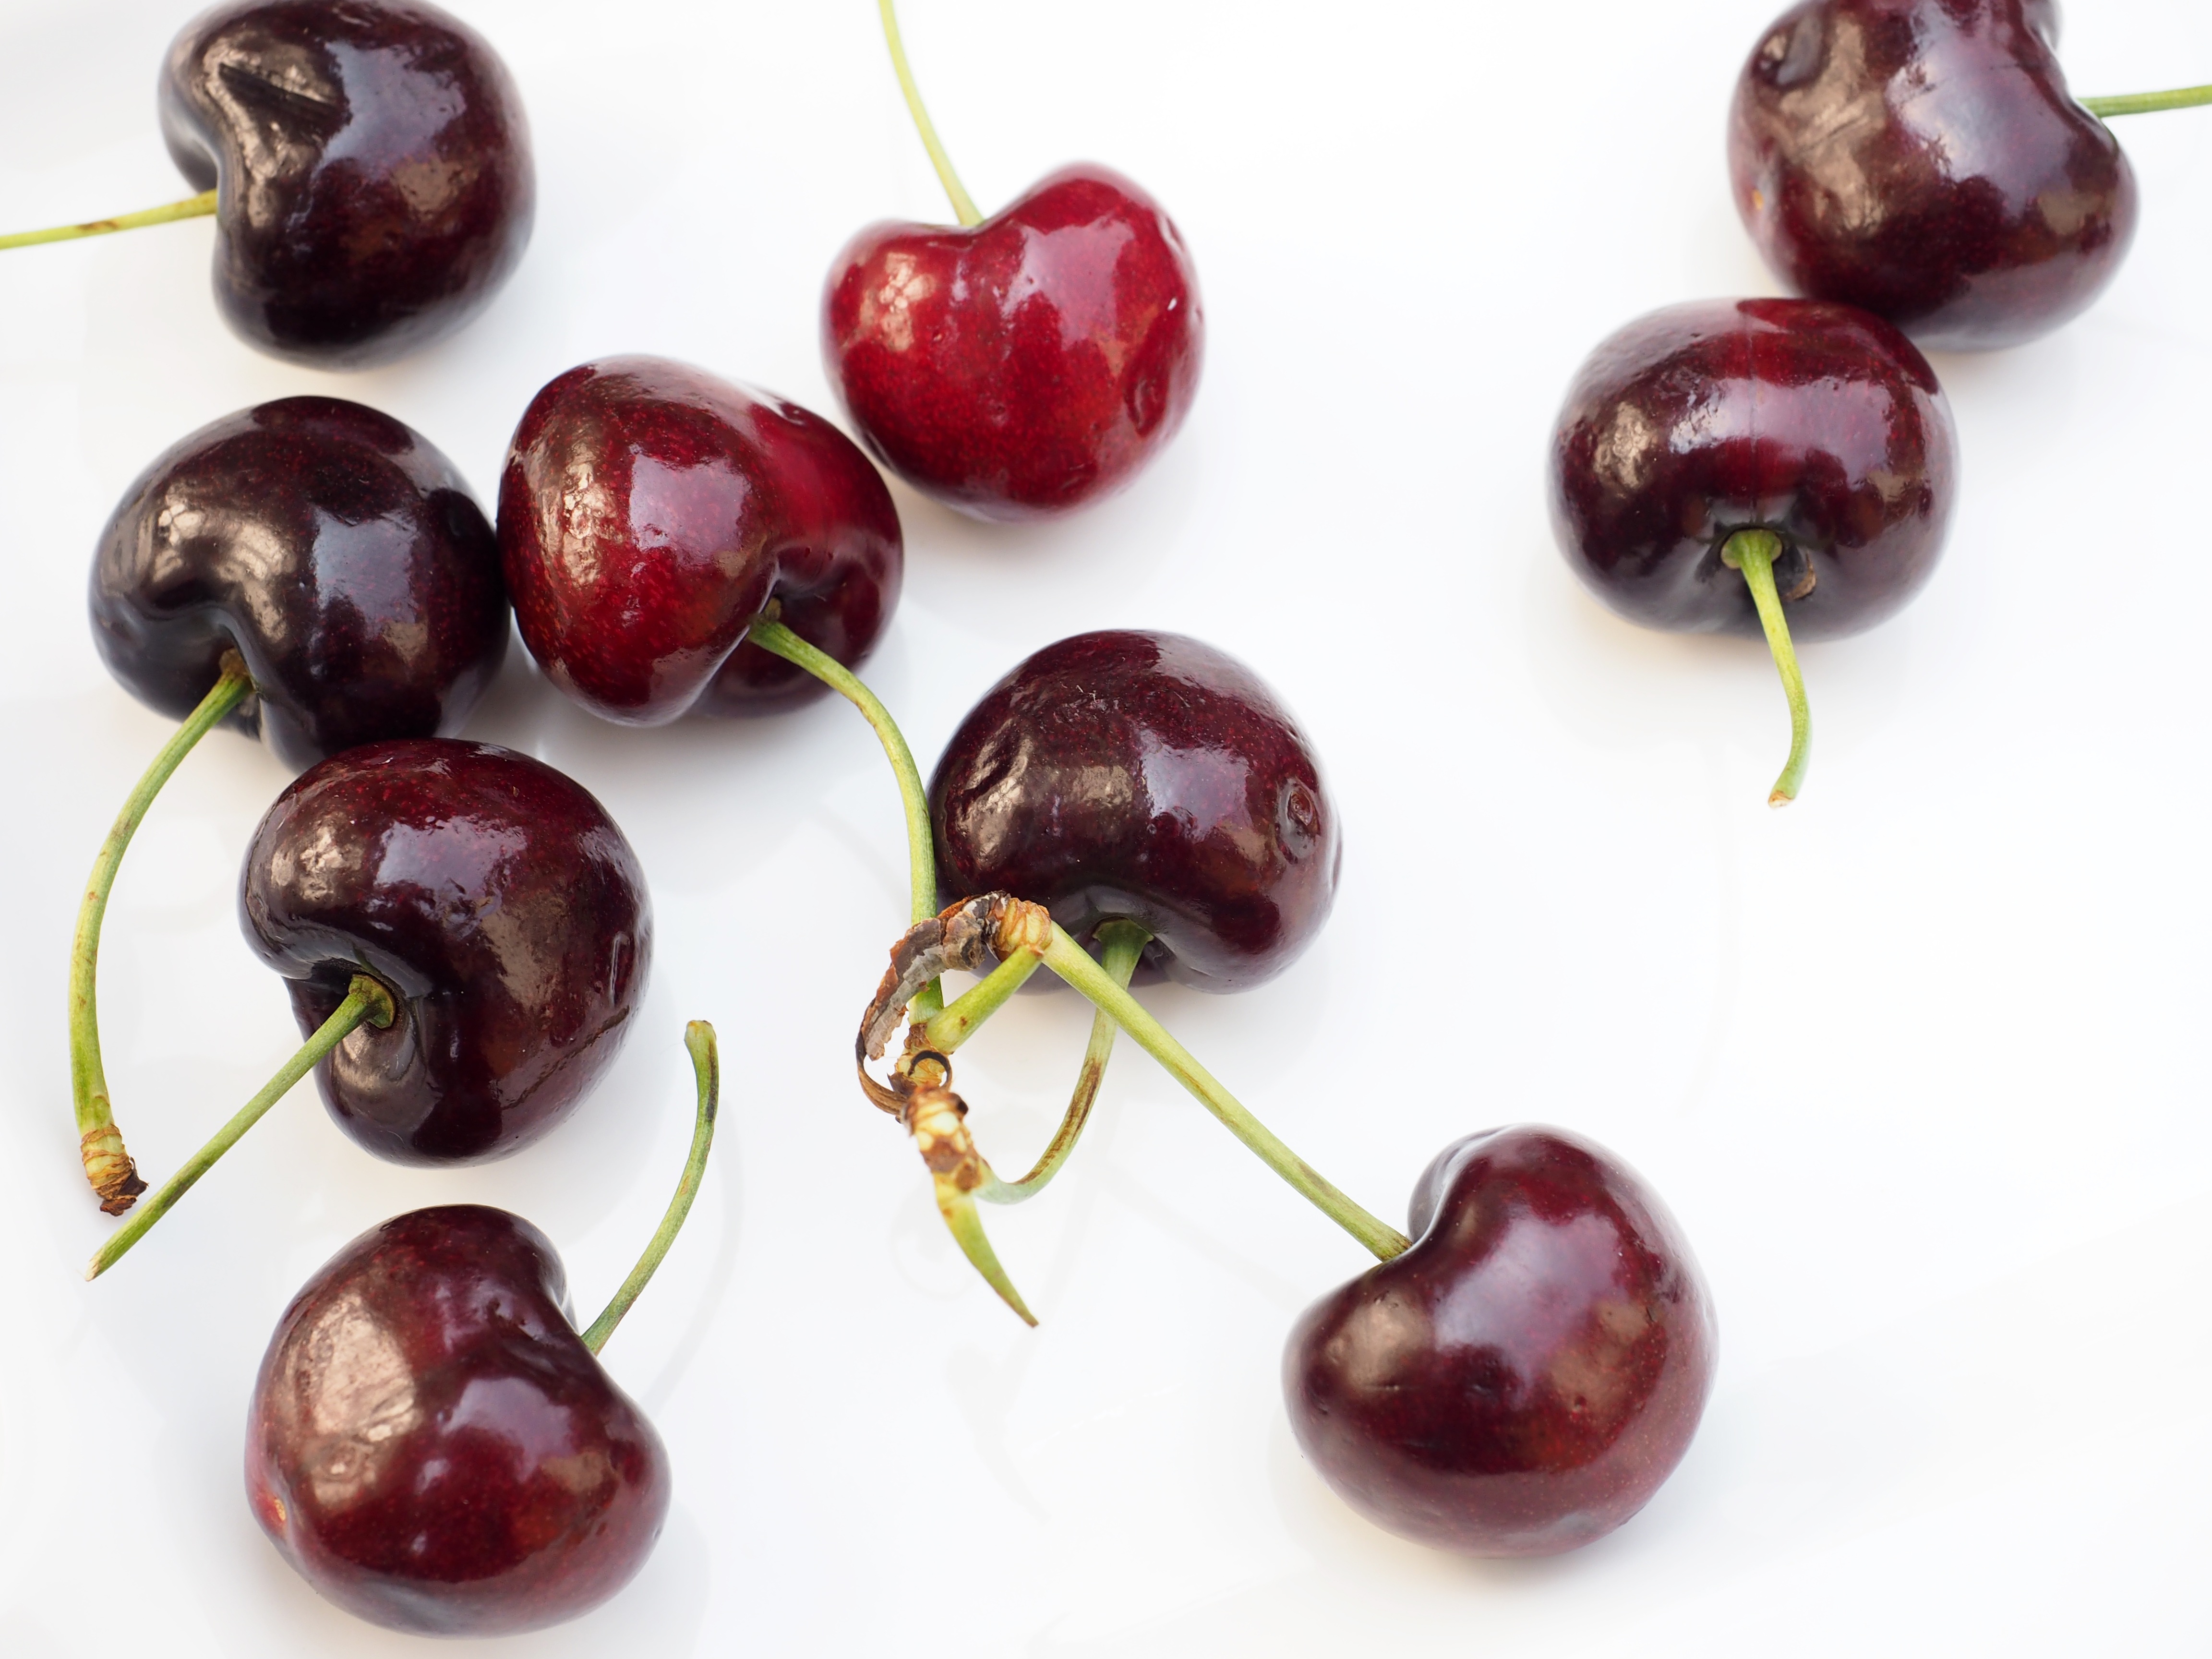 53564 download wallpaper food, cherry, berries, ripe screensavers and pictures for free